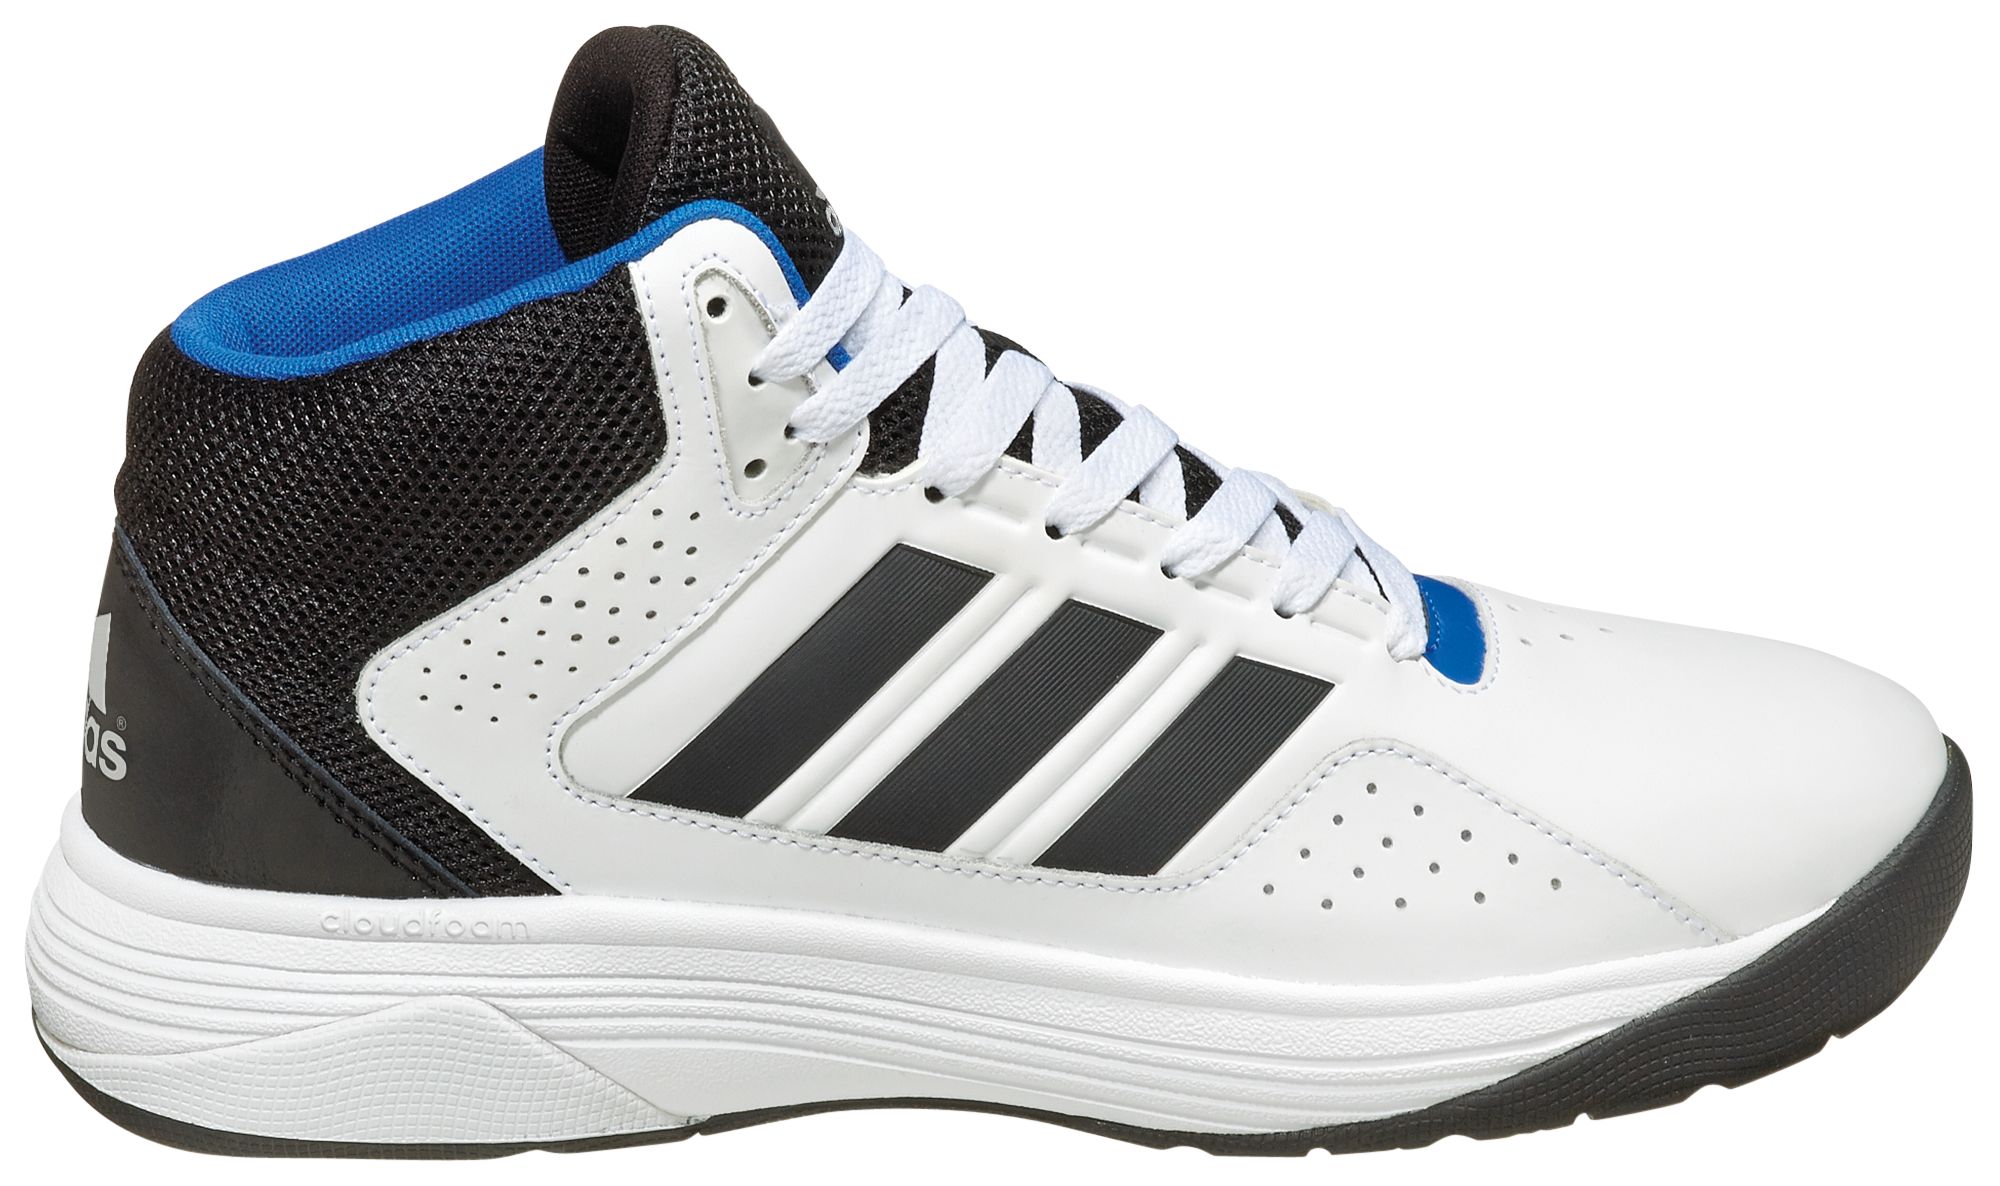 adidas basket ball,crazy ghost 2 rou chaussures basketball homme adidas